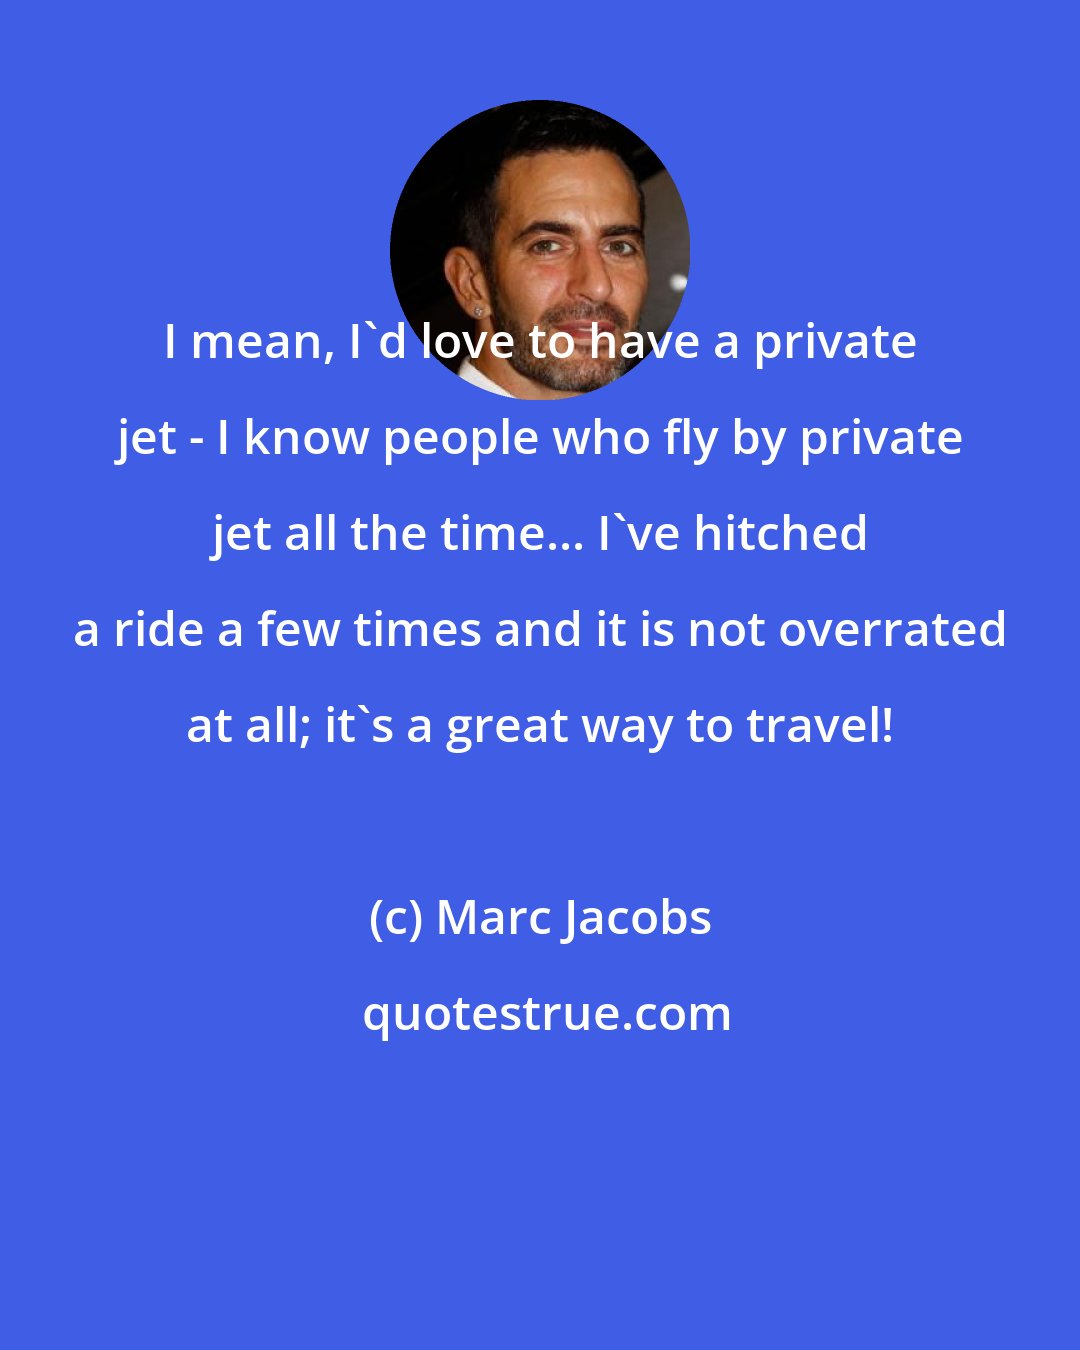 Marc Jacobs: I mean, I'd love to have a private jet - I know people who fly by private jet all the time... I've hitched a ride a few times and it is not overrated at all; it's a great way to travel!